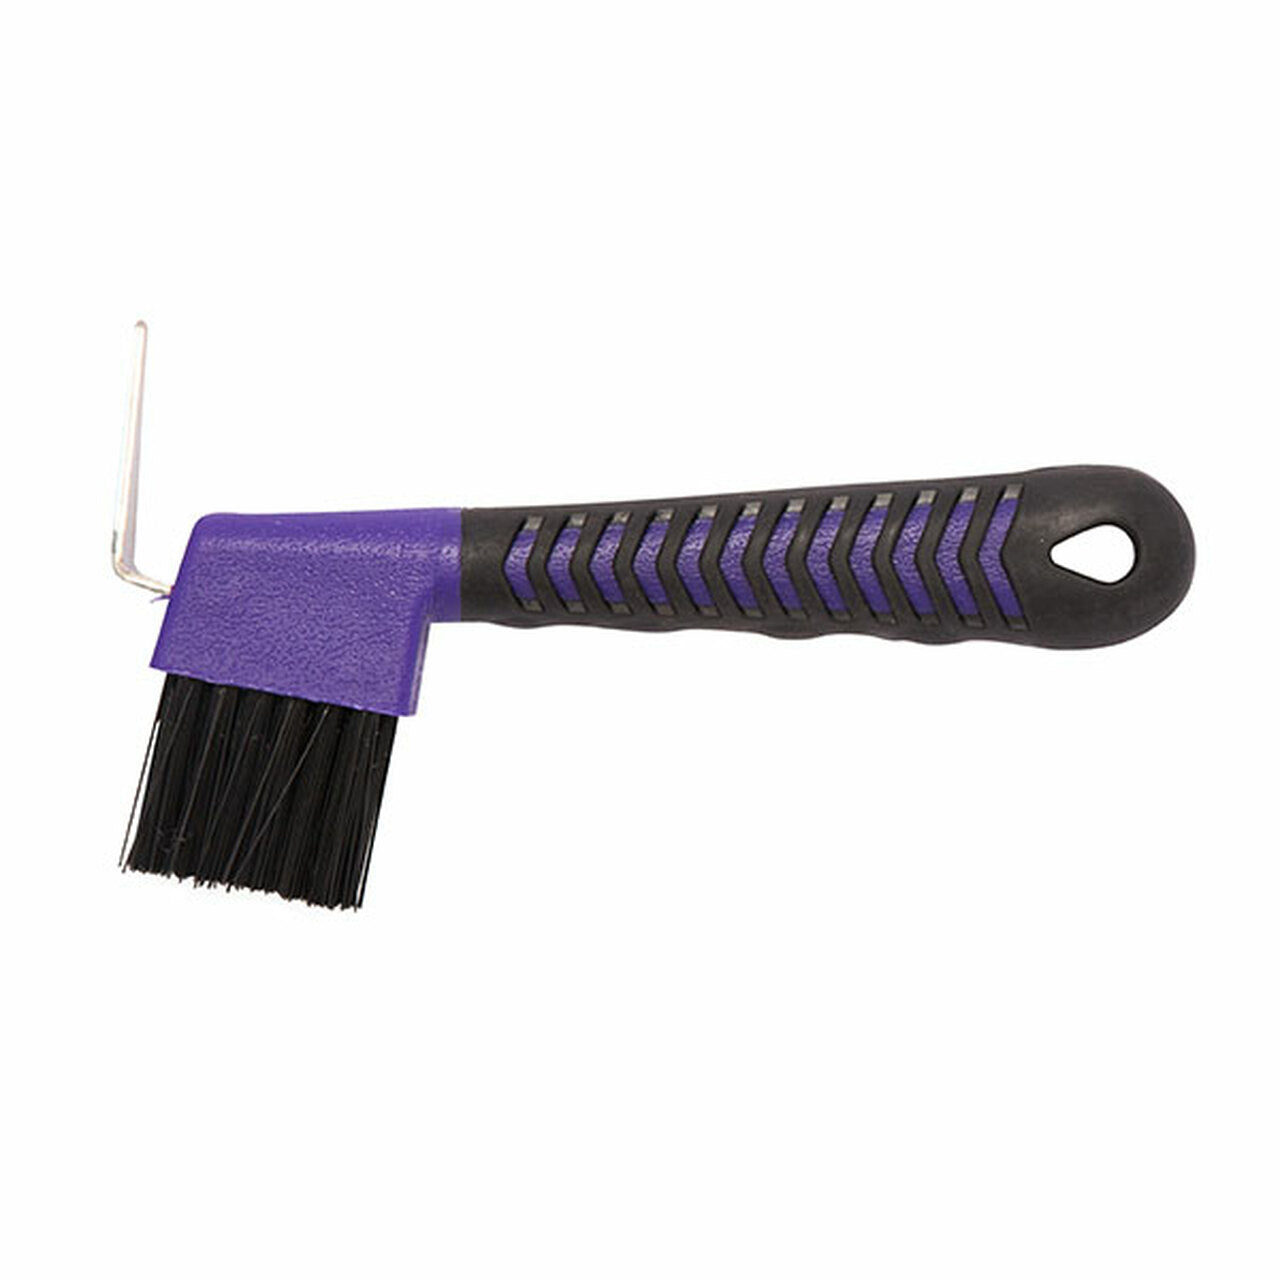 Side view of purple hoof pick with black shaped handle and bristles.